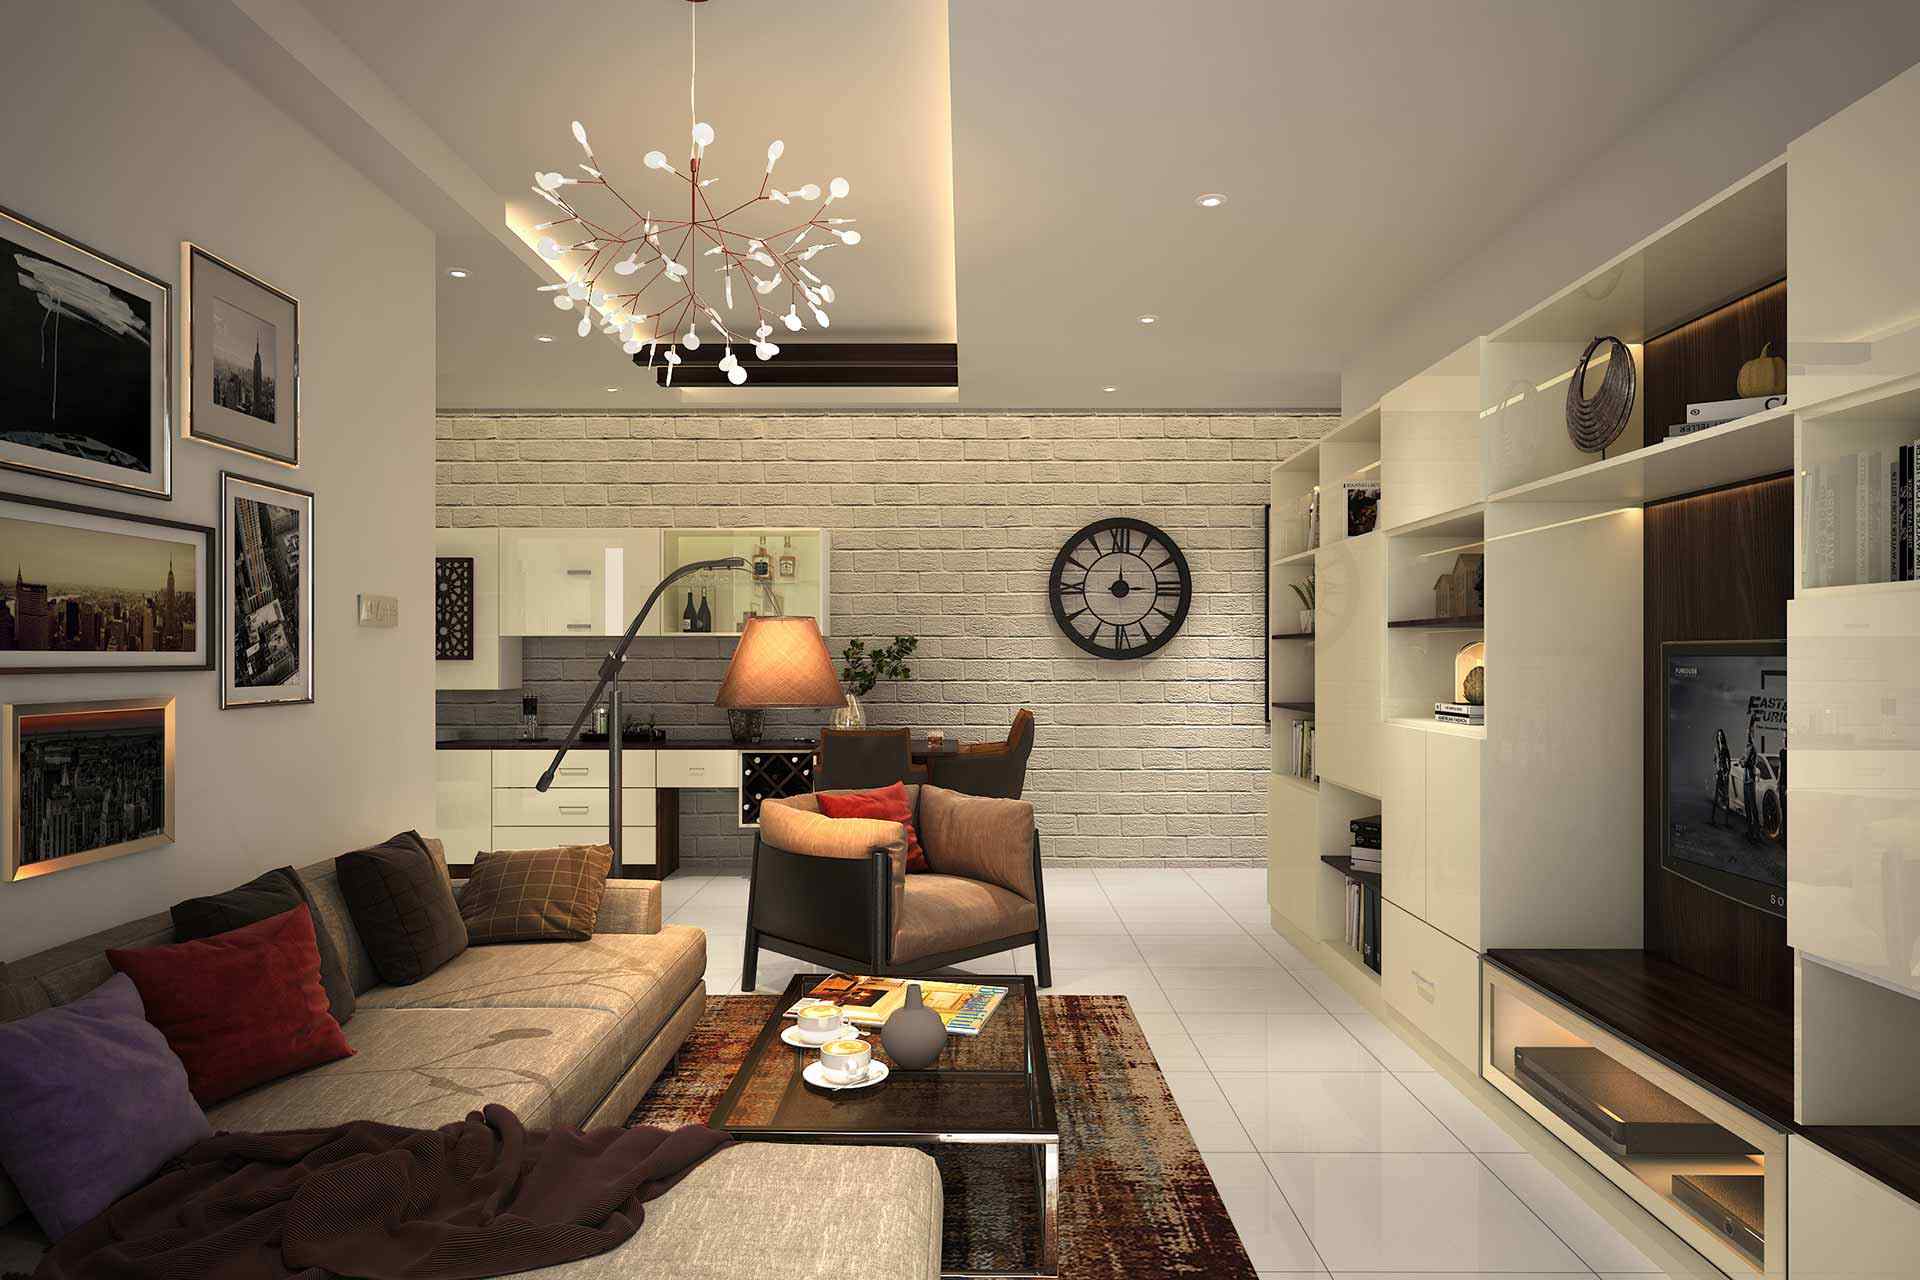 Living Room Lighting Ideas That Will Seamlessly Brighten Up the Space